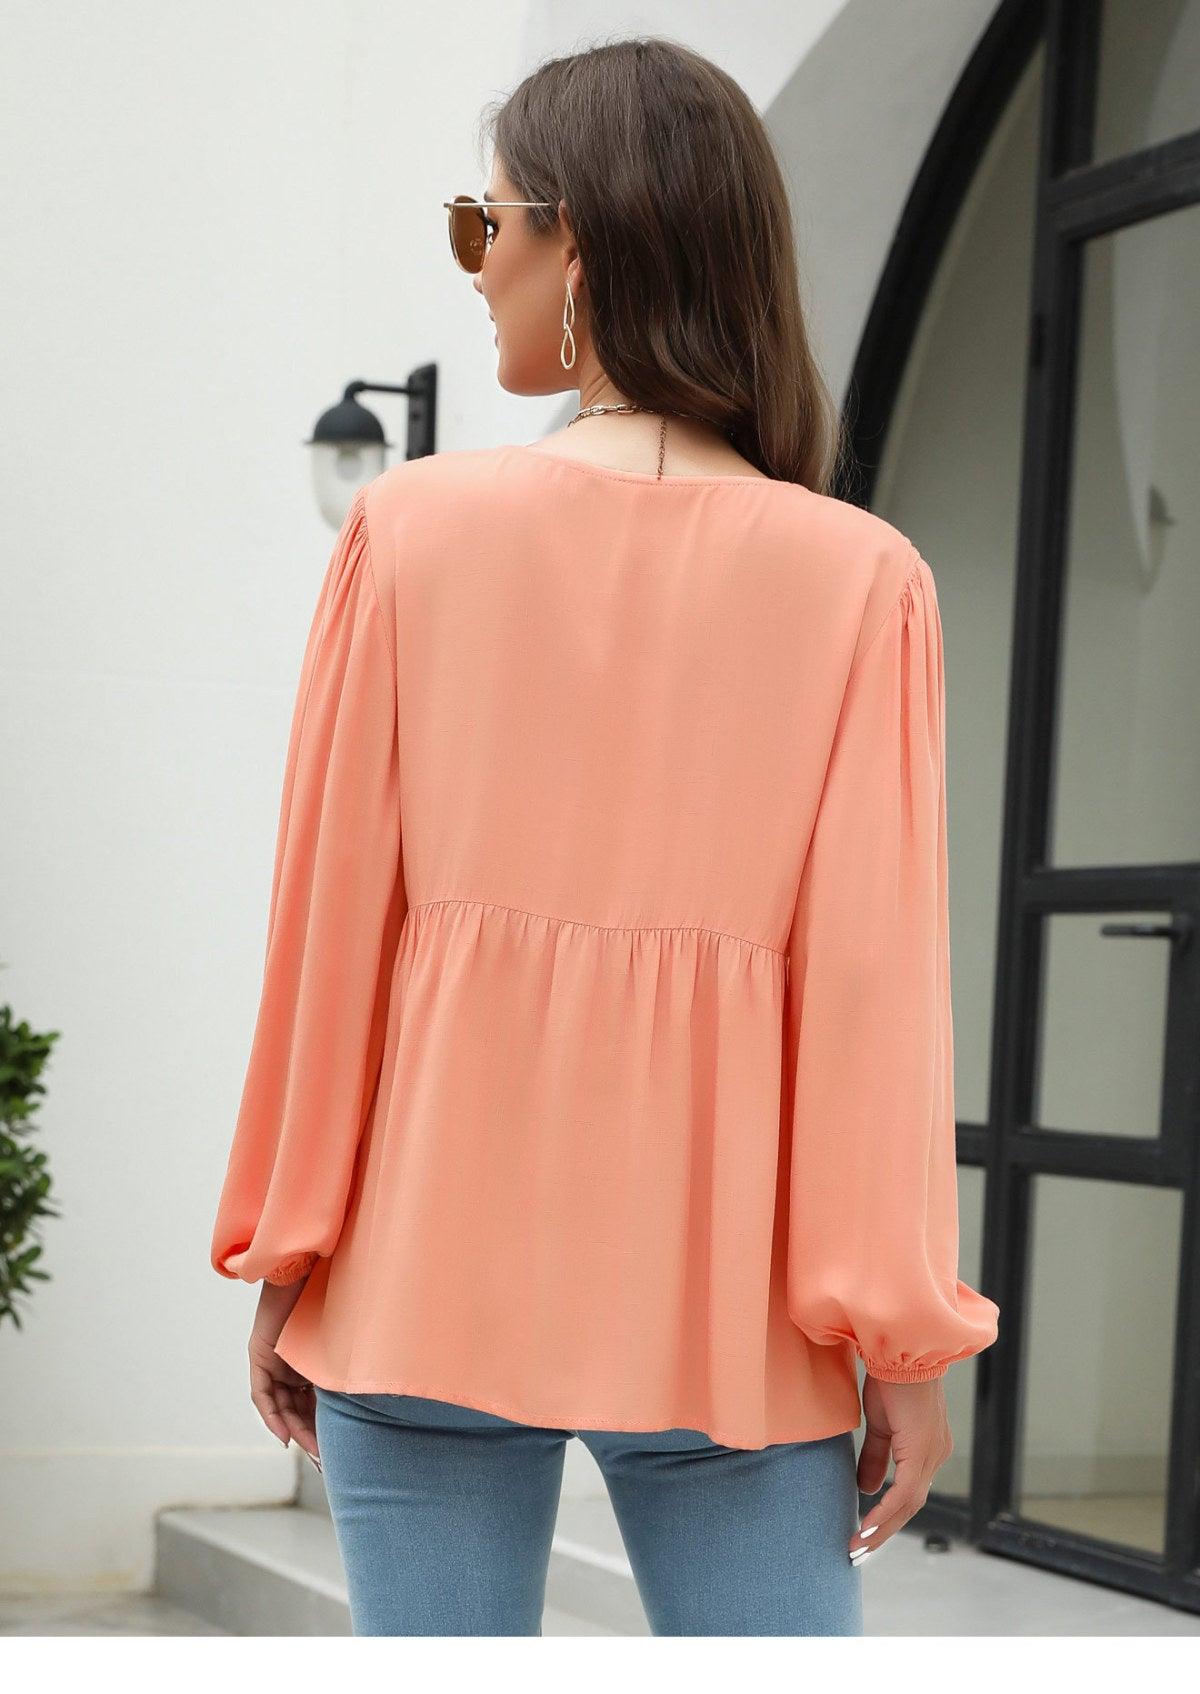 Elegant Lace Embroidered Lantern Sleeve Buttoned Blouse